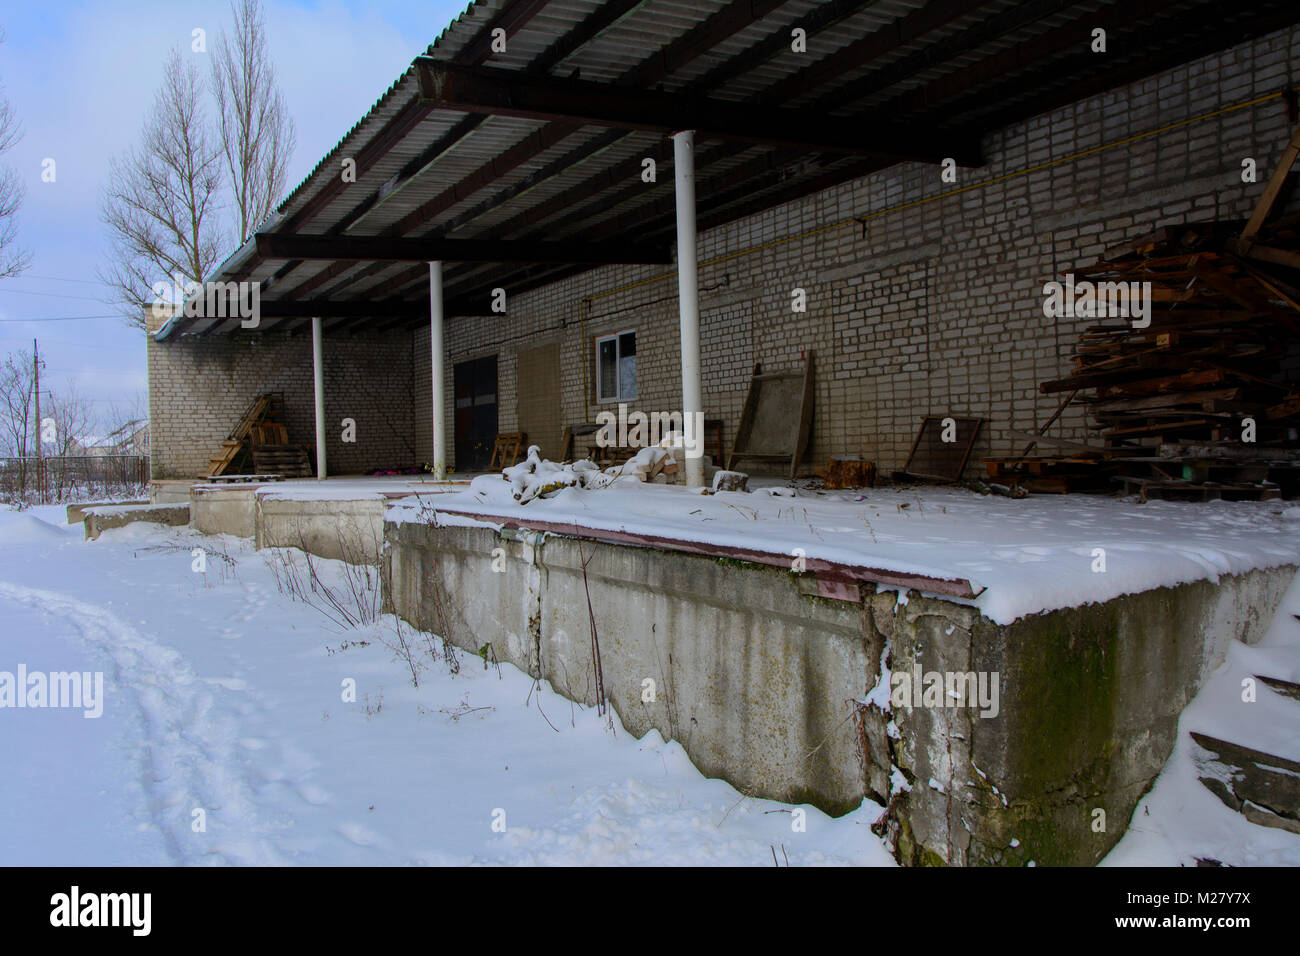 A platform for loading and unloading materials of the destroyed and abandoned bakery building against the background of winter trees and a blue cold w Stock Photo